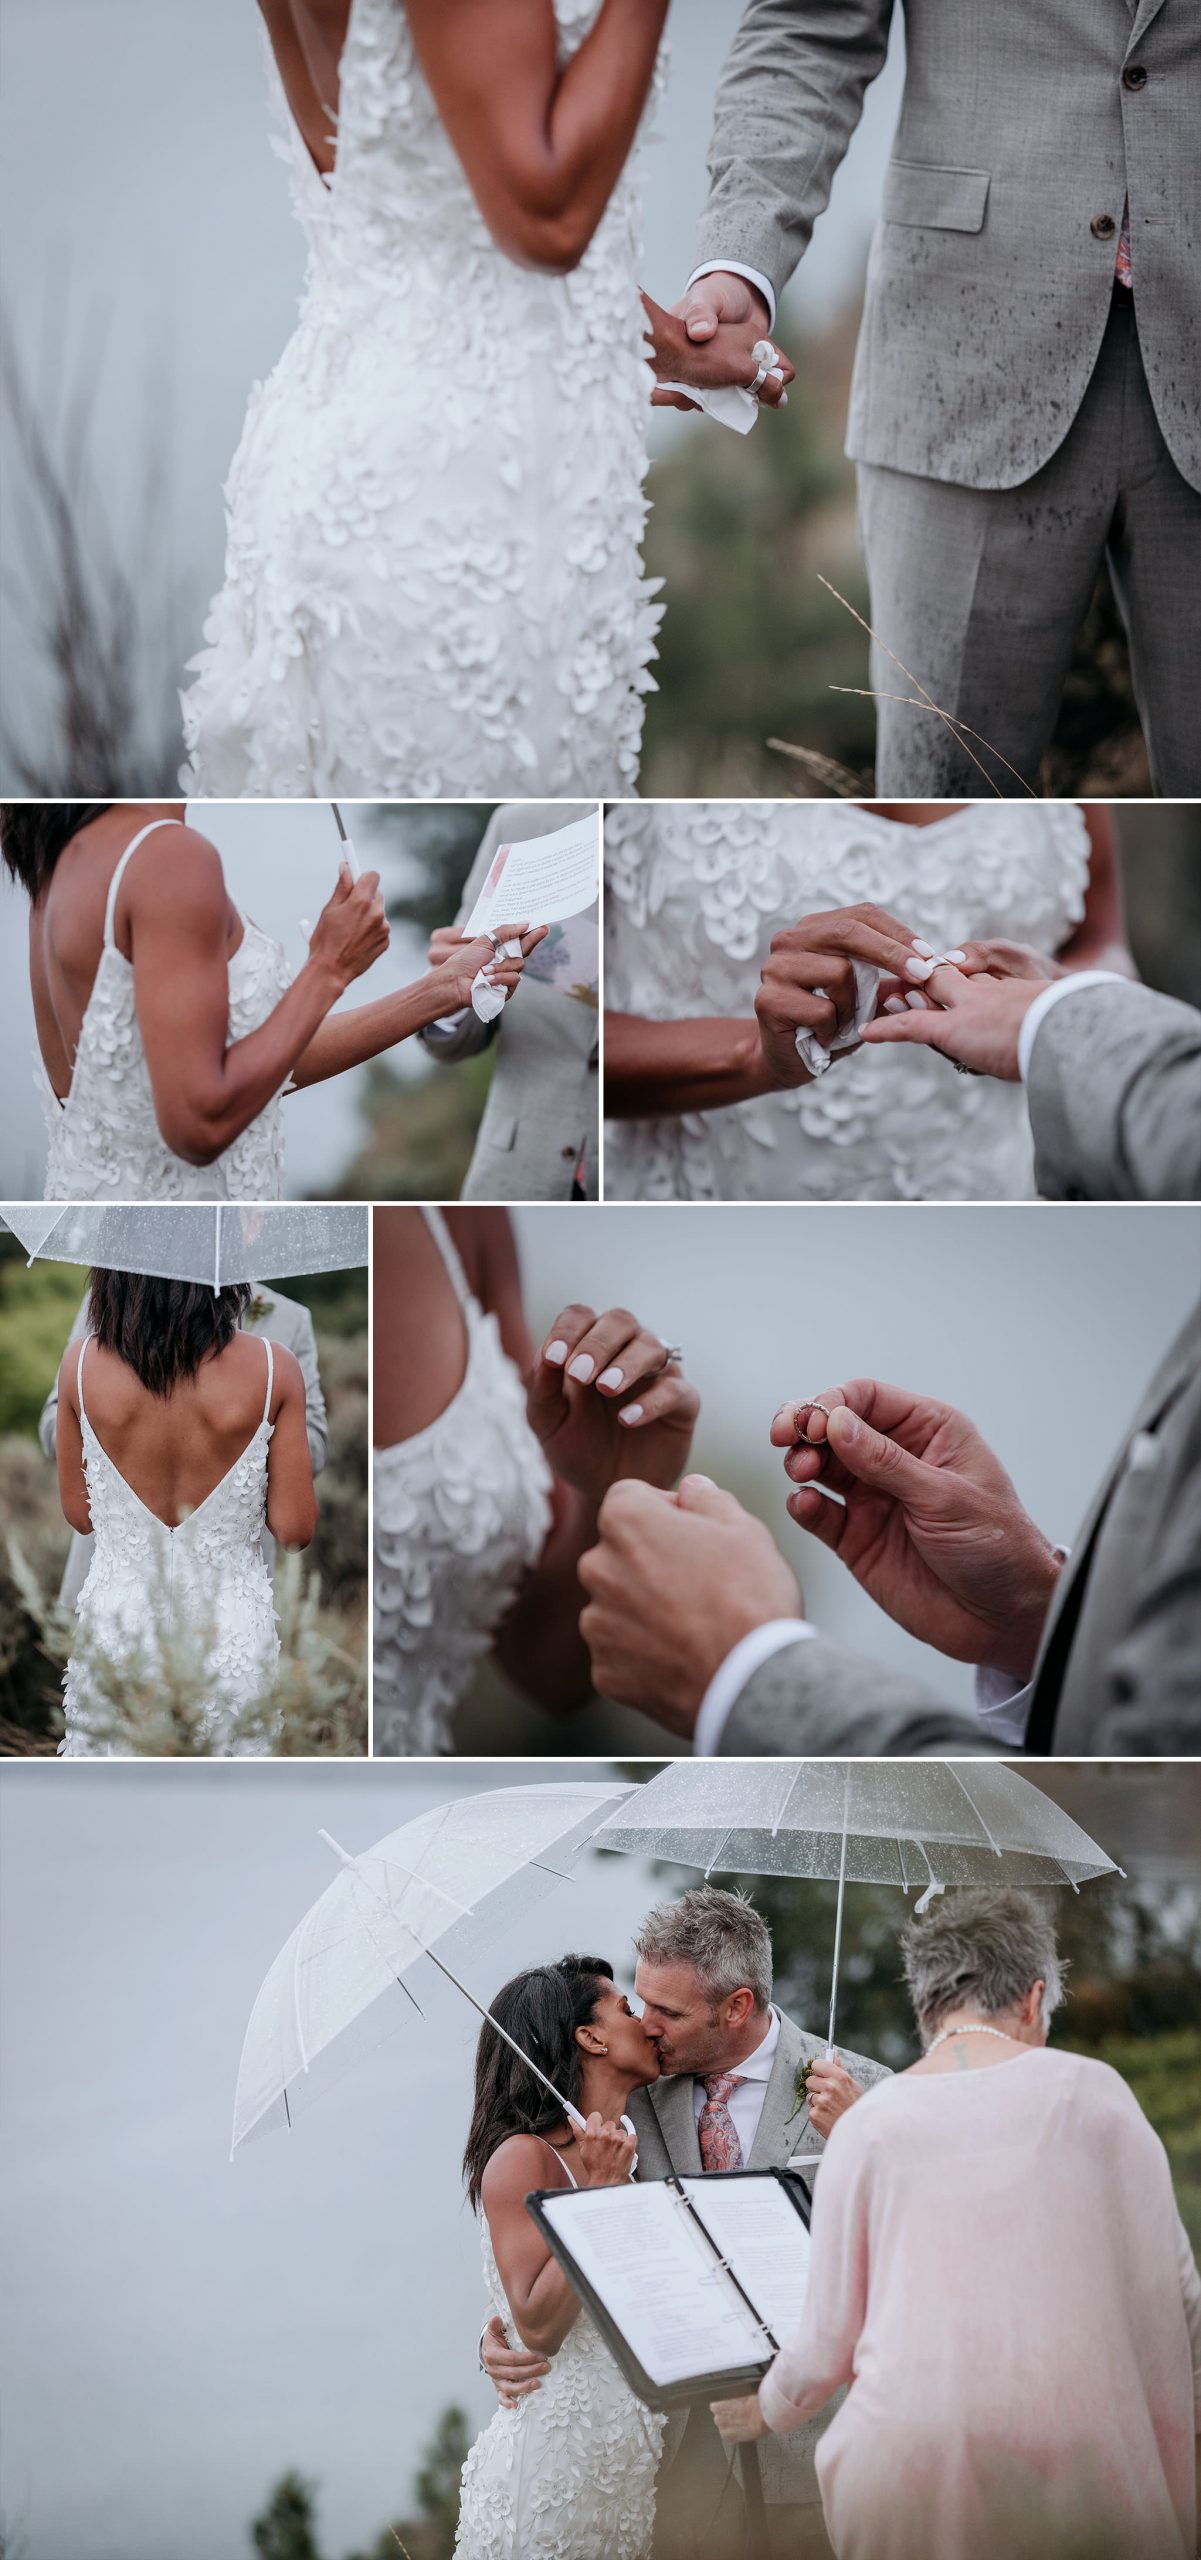 Bride and groom exchange rings during rainy ceremony.